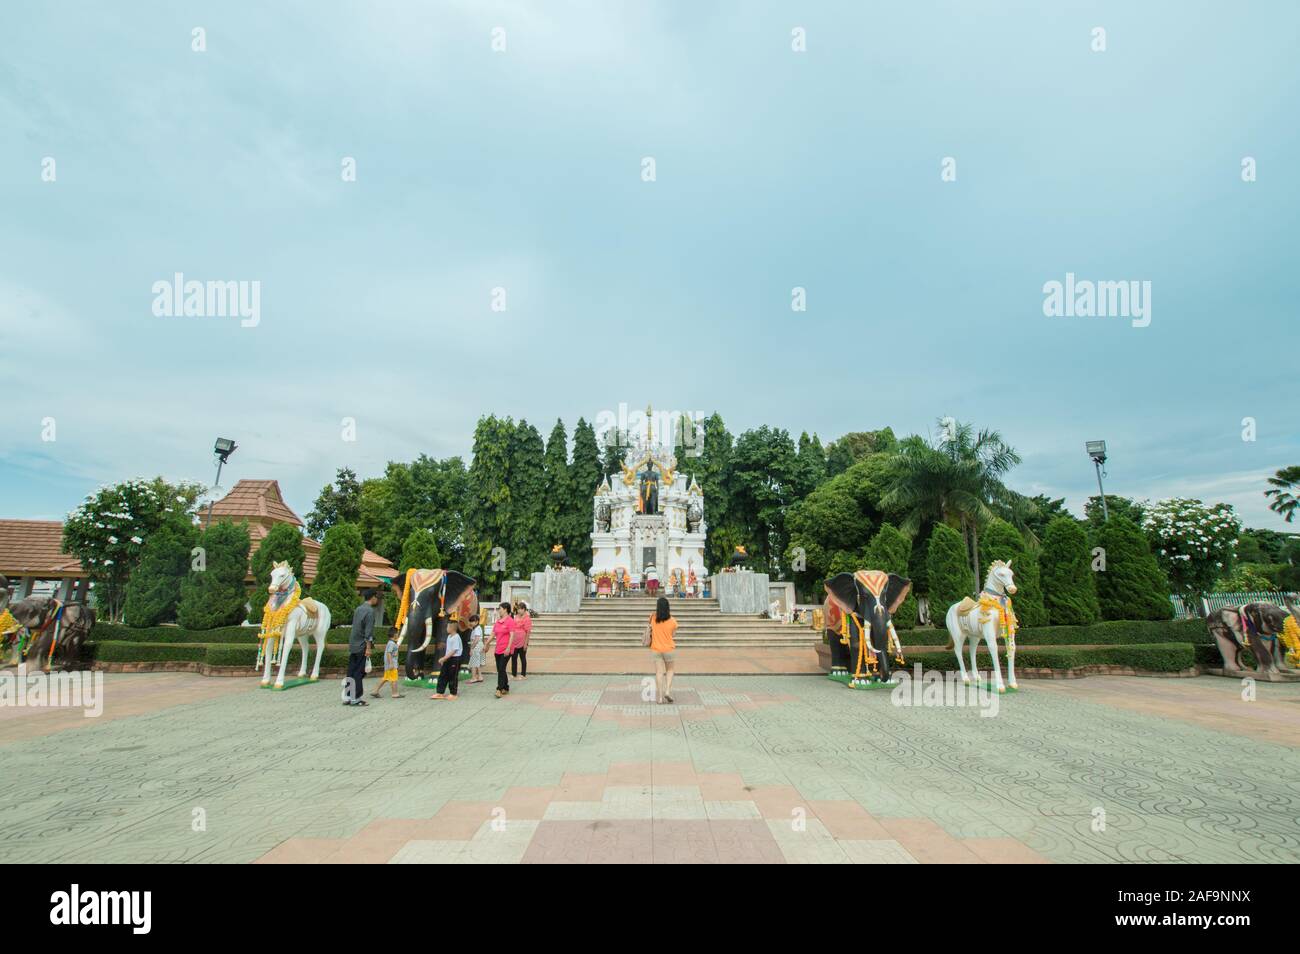 Phayao, Thailand - October 13, 2019: The Pho Khun Ngam Mueang Monument is located in the public park near Kwan Phayao lake. Stock Photo